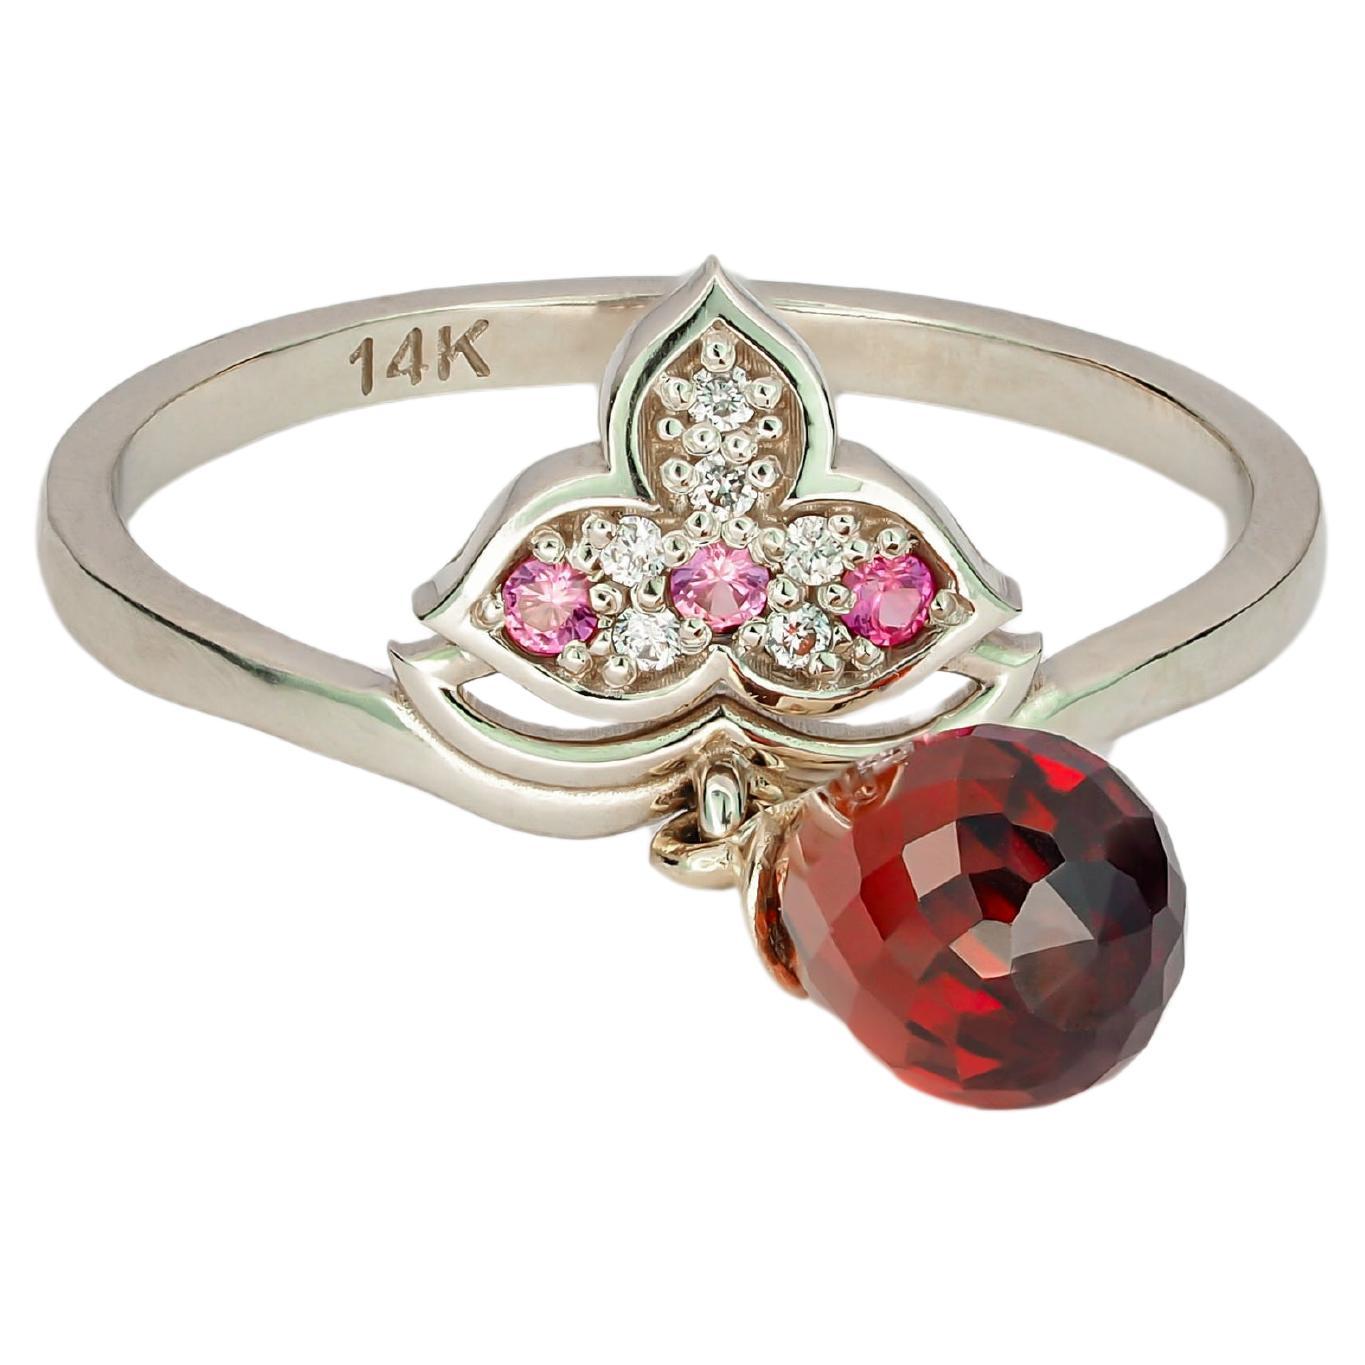 Lotus 14k gold ring with garnet.  For Sale